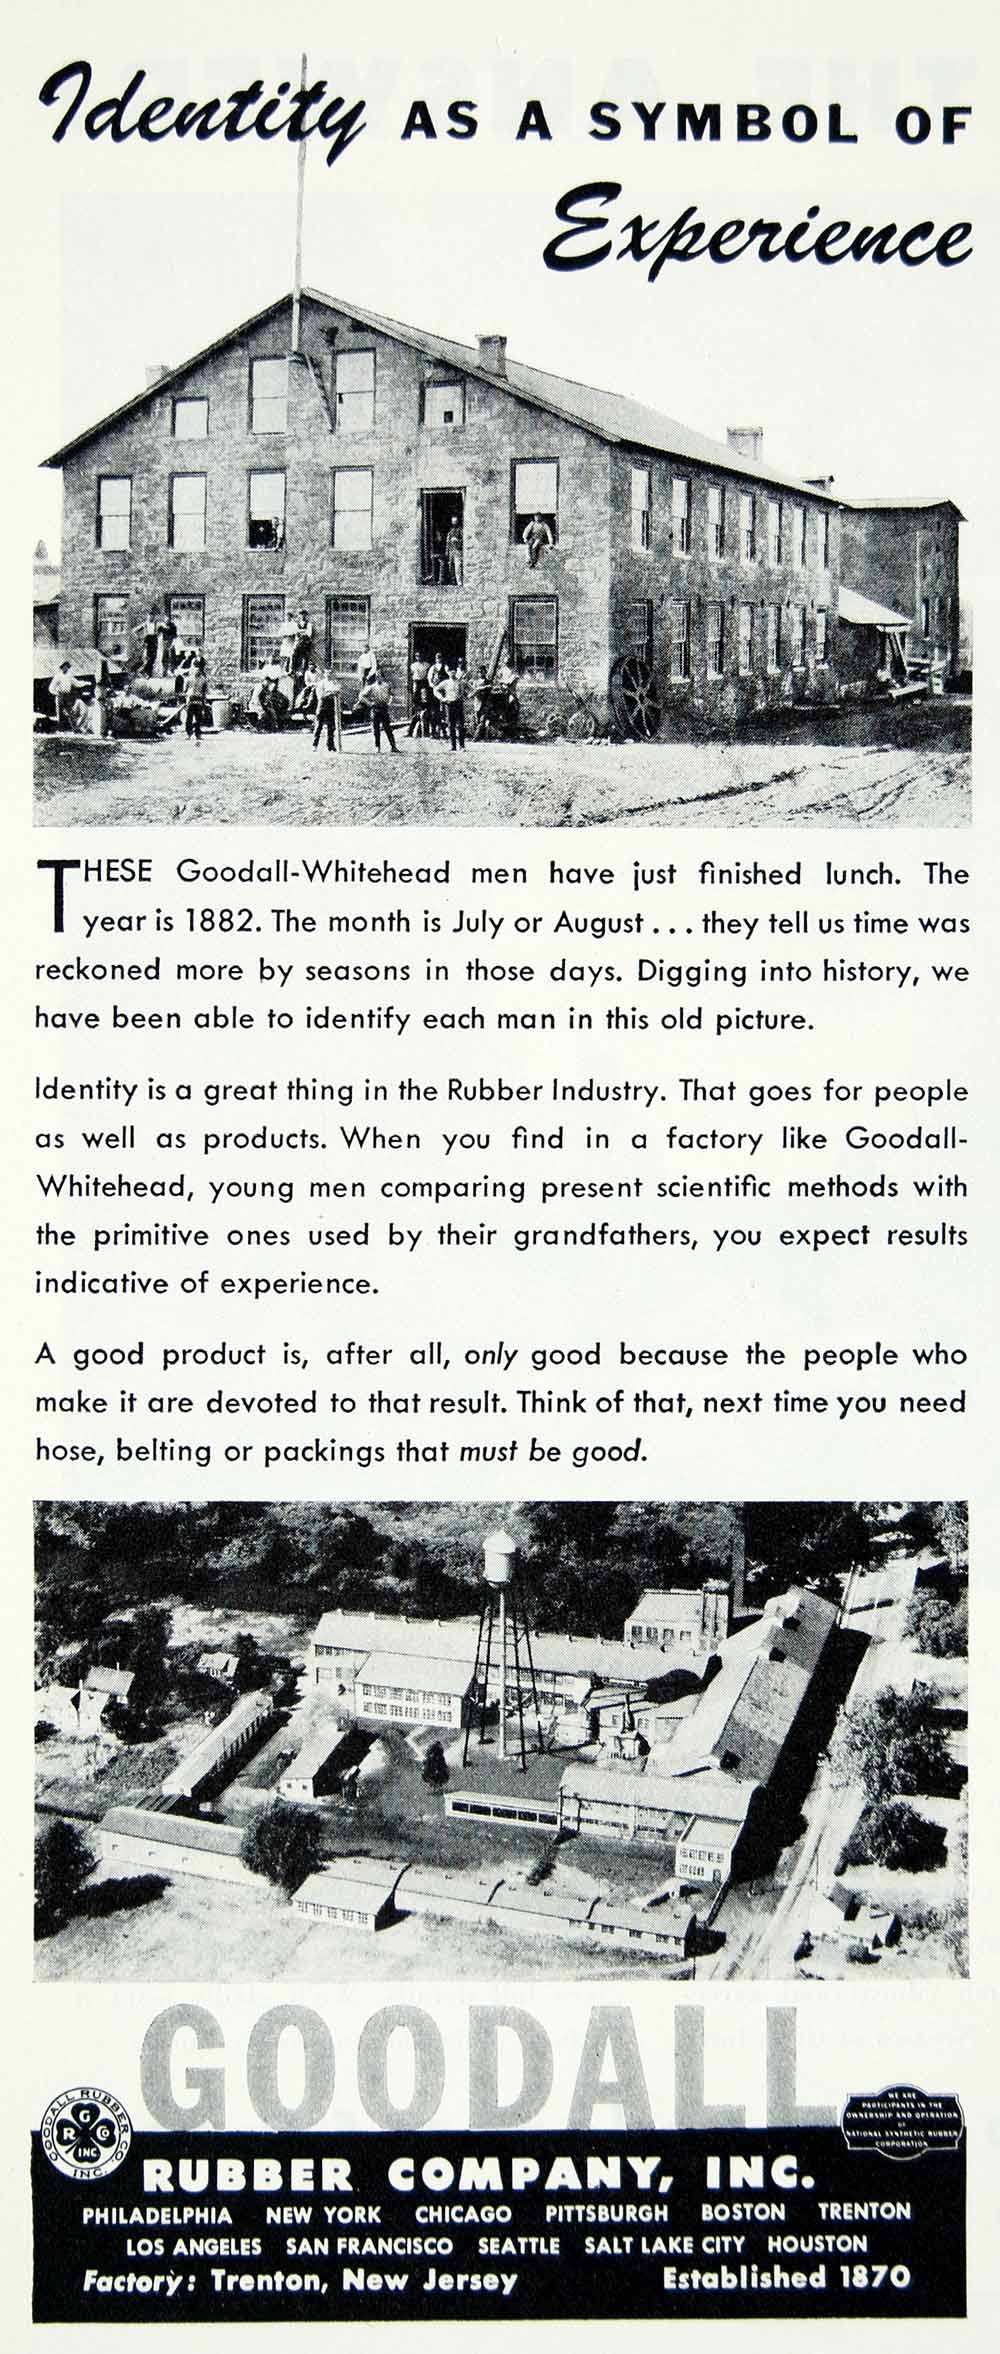 1946 Ad Goodall Rubber Company Plant Warehouse Industrial Manufacturing FTM1